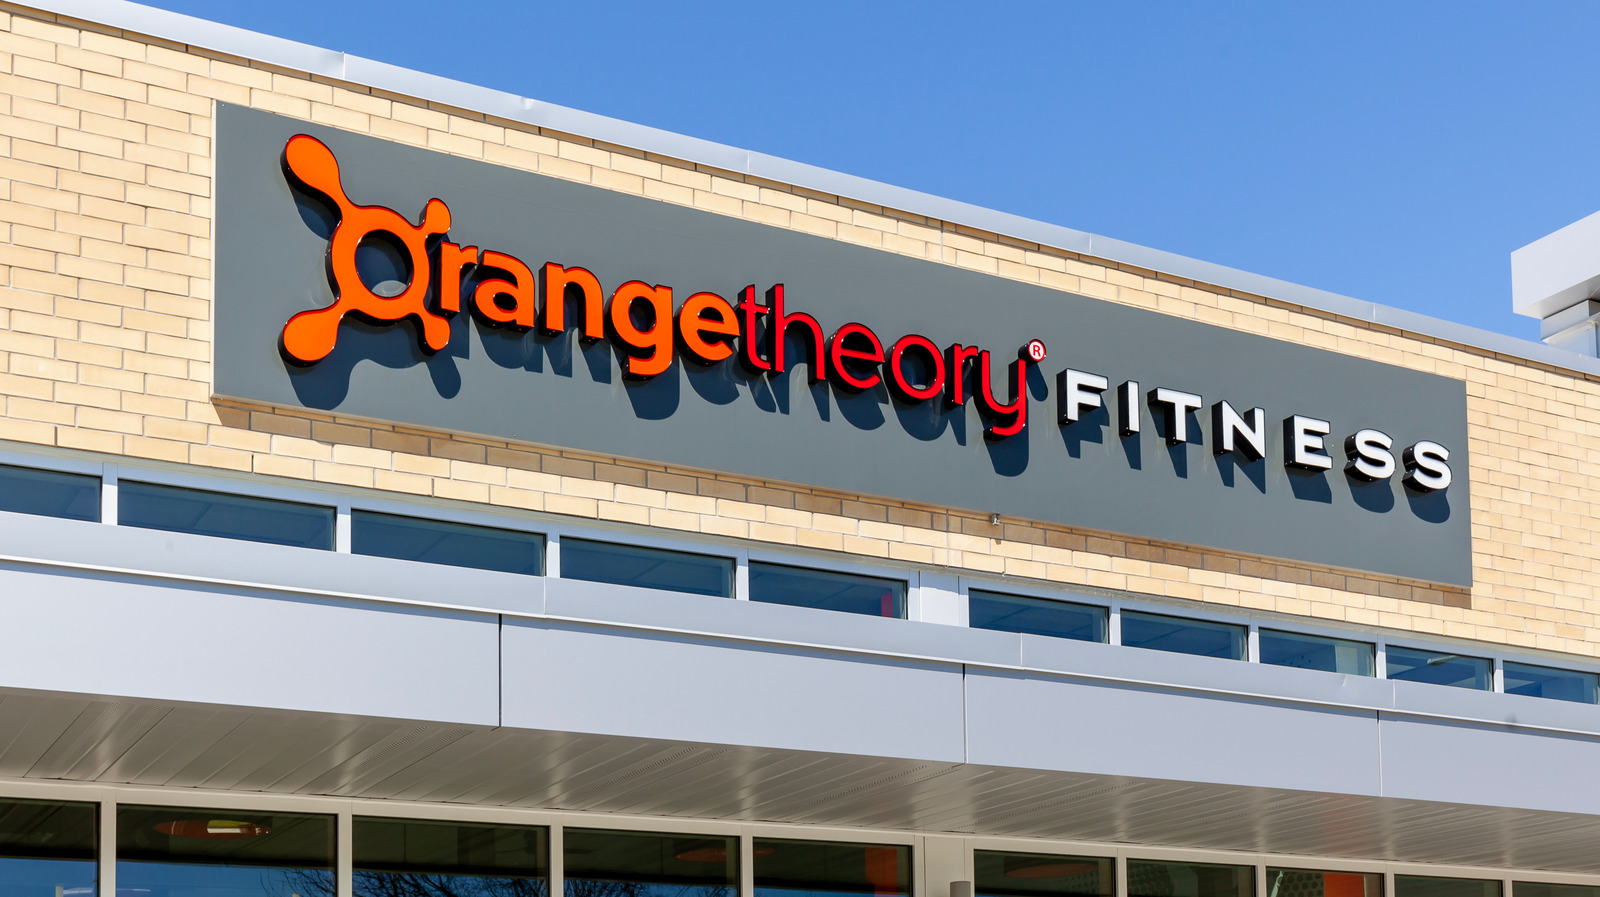 Orangetheory Price and Other Info to Know Before Signing Up